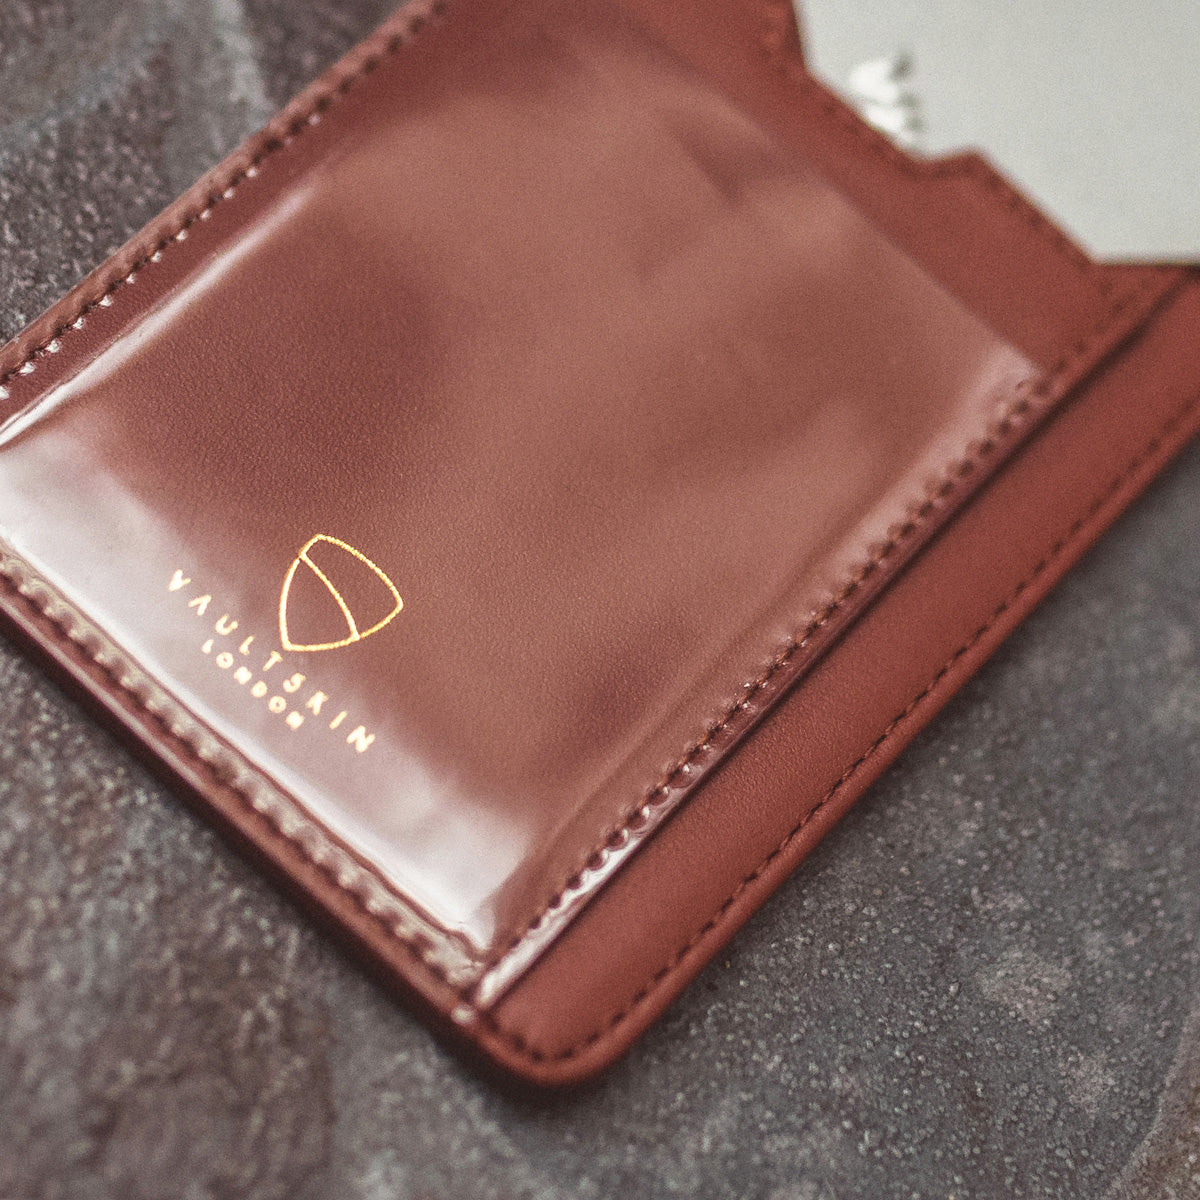 Stylish Brixton wallet with cash and cards